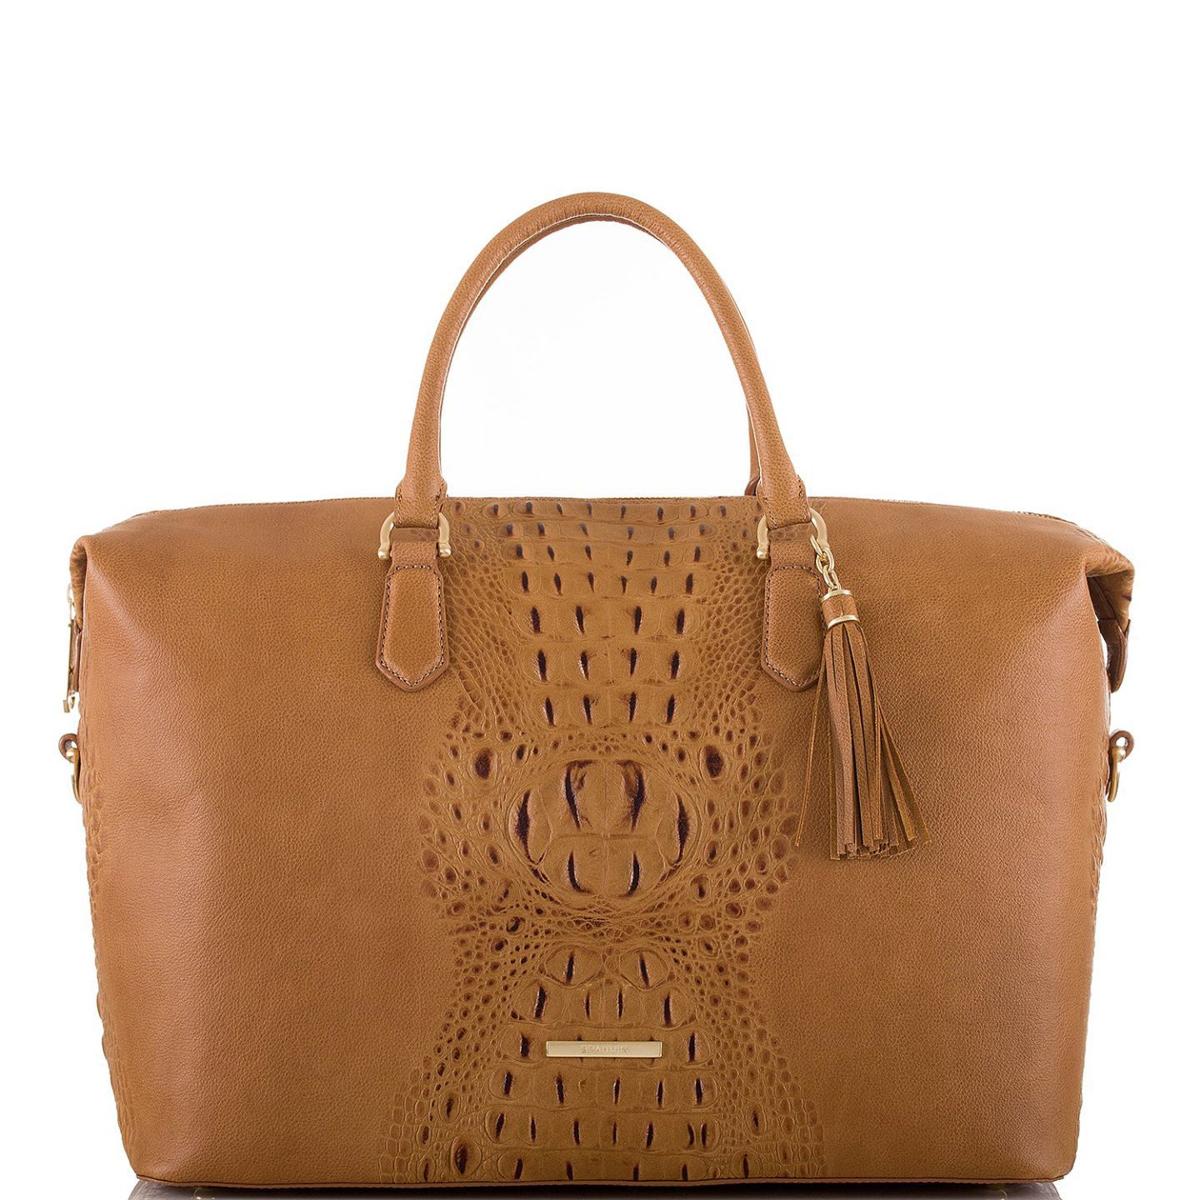 Markel Ventures buying majority stake in luxury leather handbags and accessories business ...